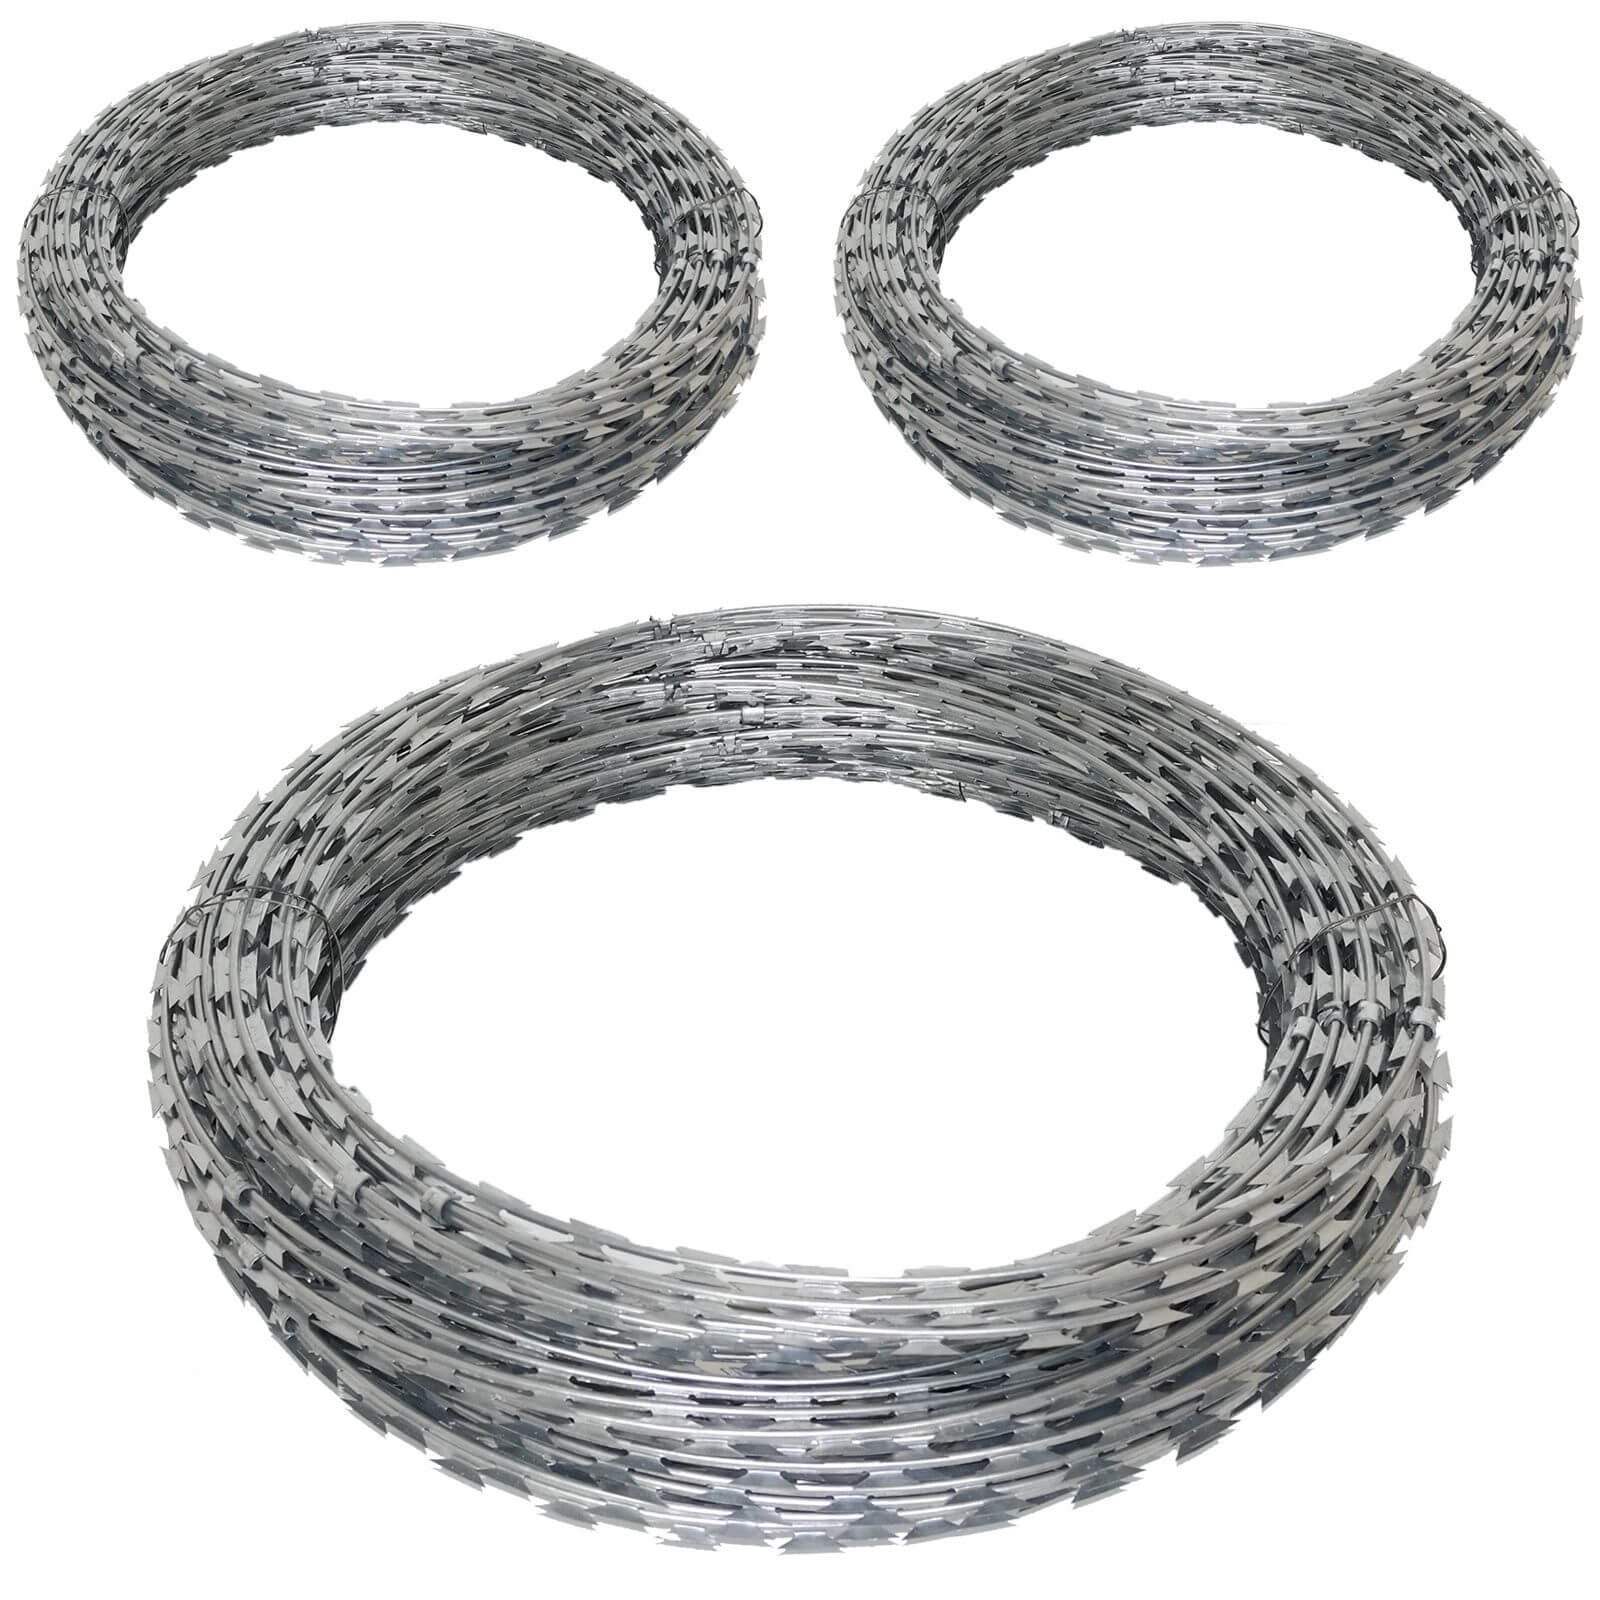 Razor wire fencing: enhancing security and protection